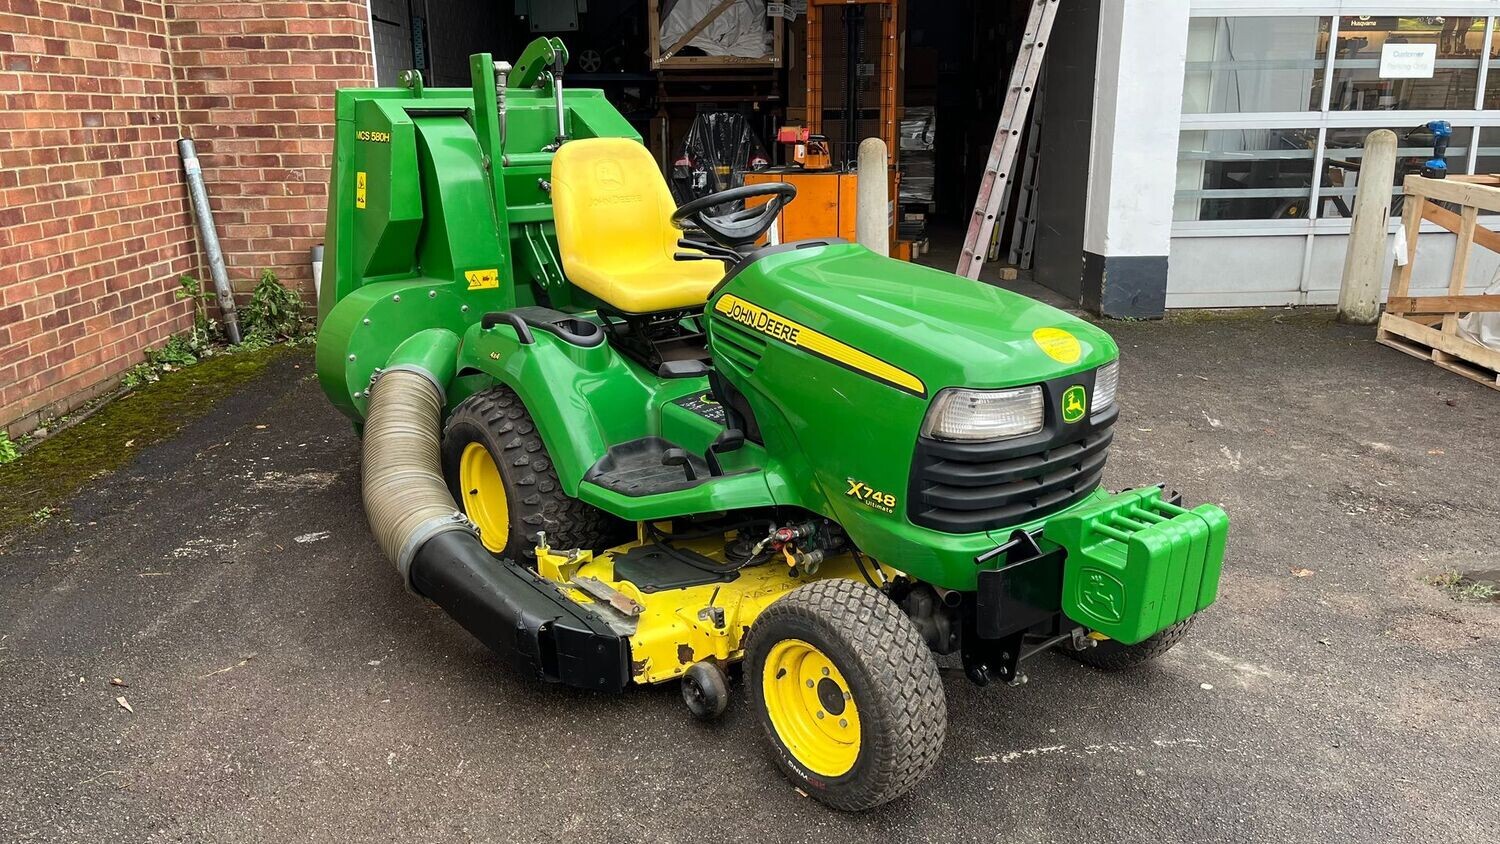 John Deere X748 Diesel Lawn Tractor with 54" Cutting deck and High-dump Clam-shell Grass Collector (used)